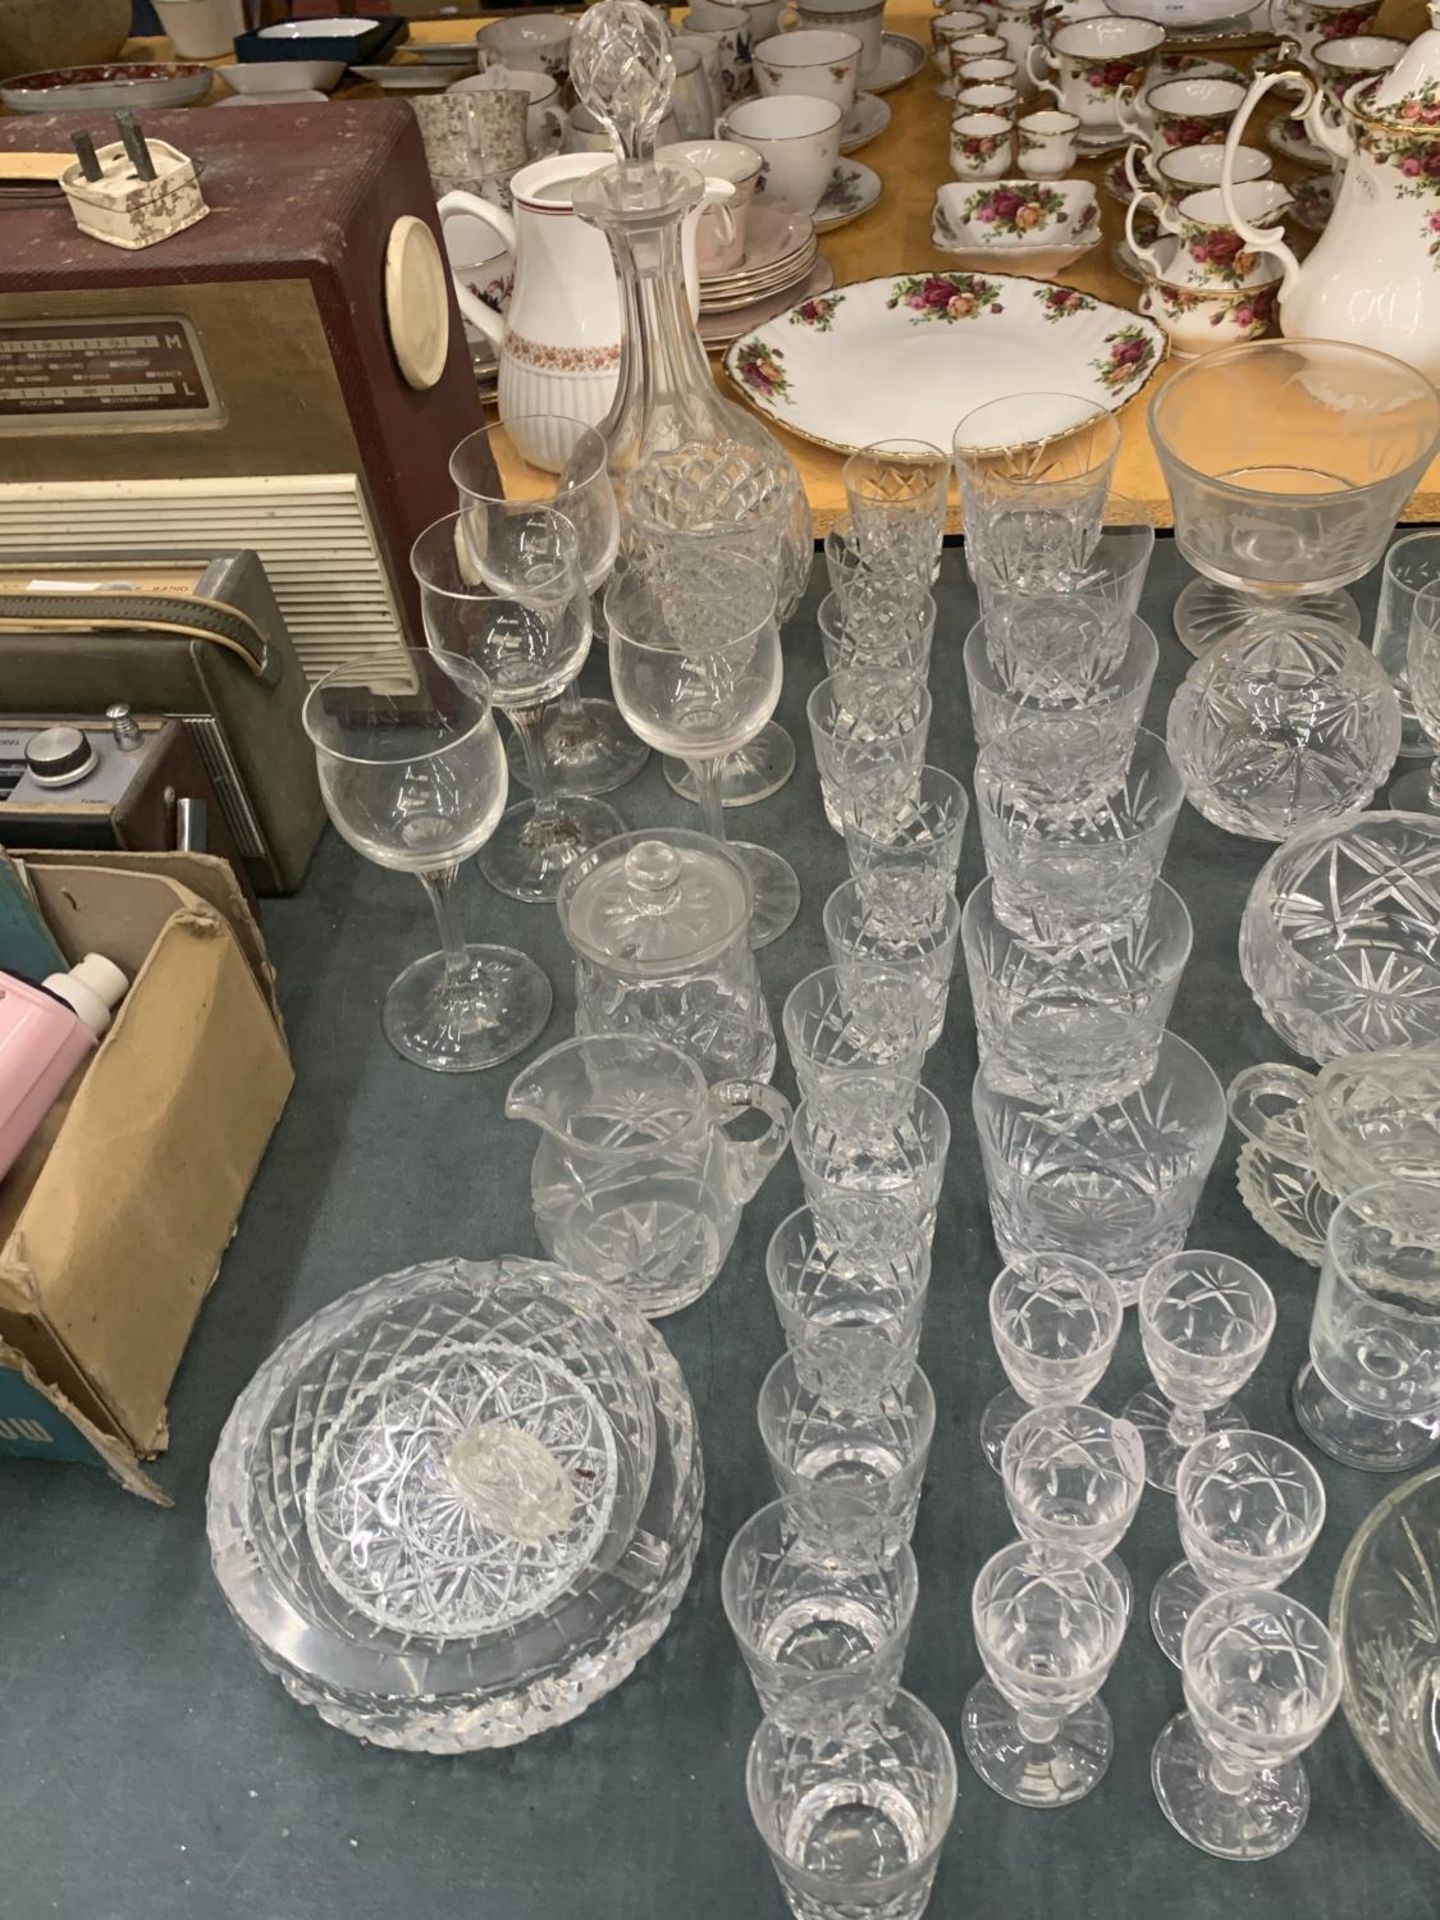 A LARGE QUANTITY OF GLASSWARE TO INCLUDE A DECANTER, JUGS, BOWLS, VASES, PORT GLASSES, WINE, - Image 3 of 3